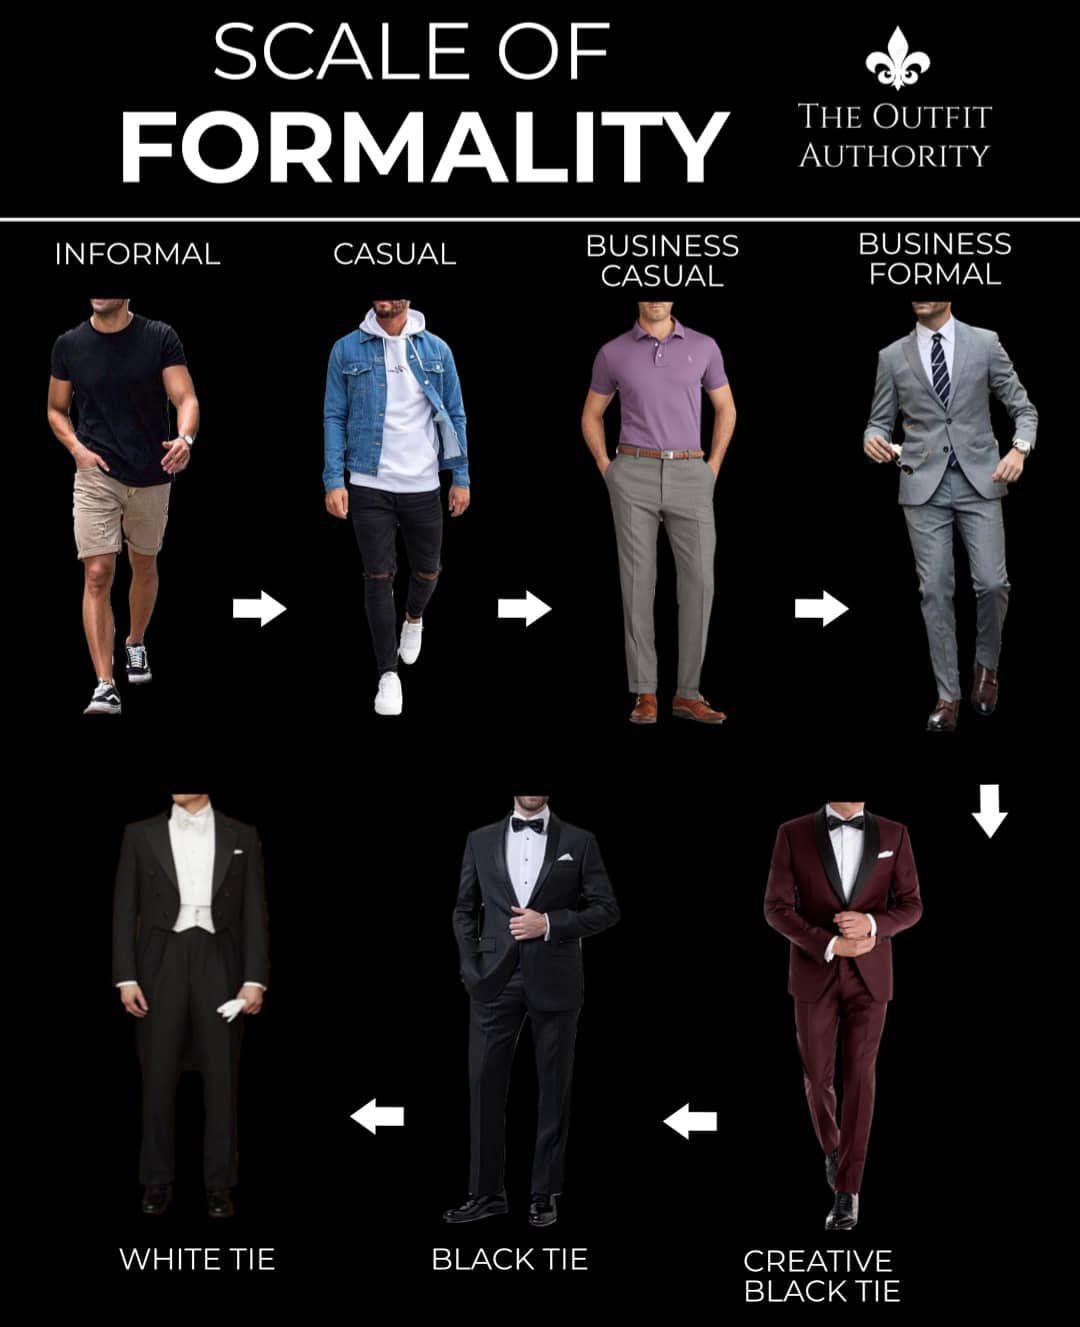 infographics and charts - scale of formality men - Scale Of Formality Informal White Tie Casual Business Casual Black Tie The Outfit Authority Business Formal Creative Black Tie